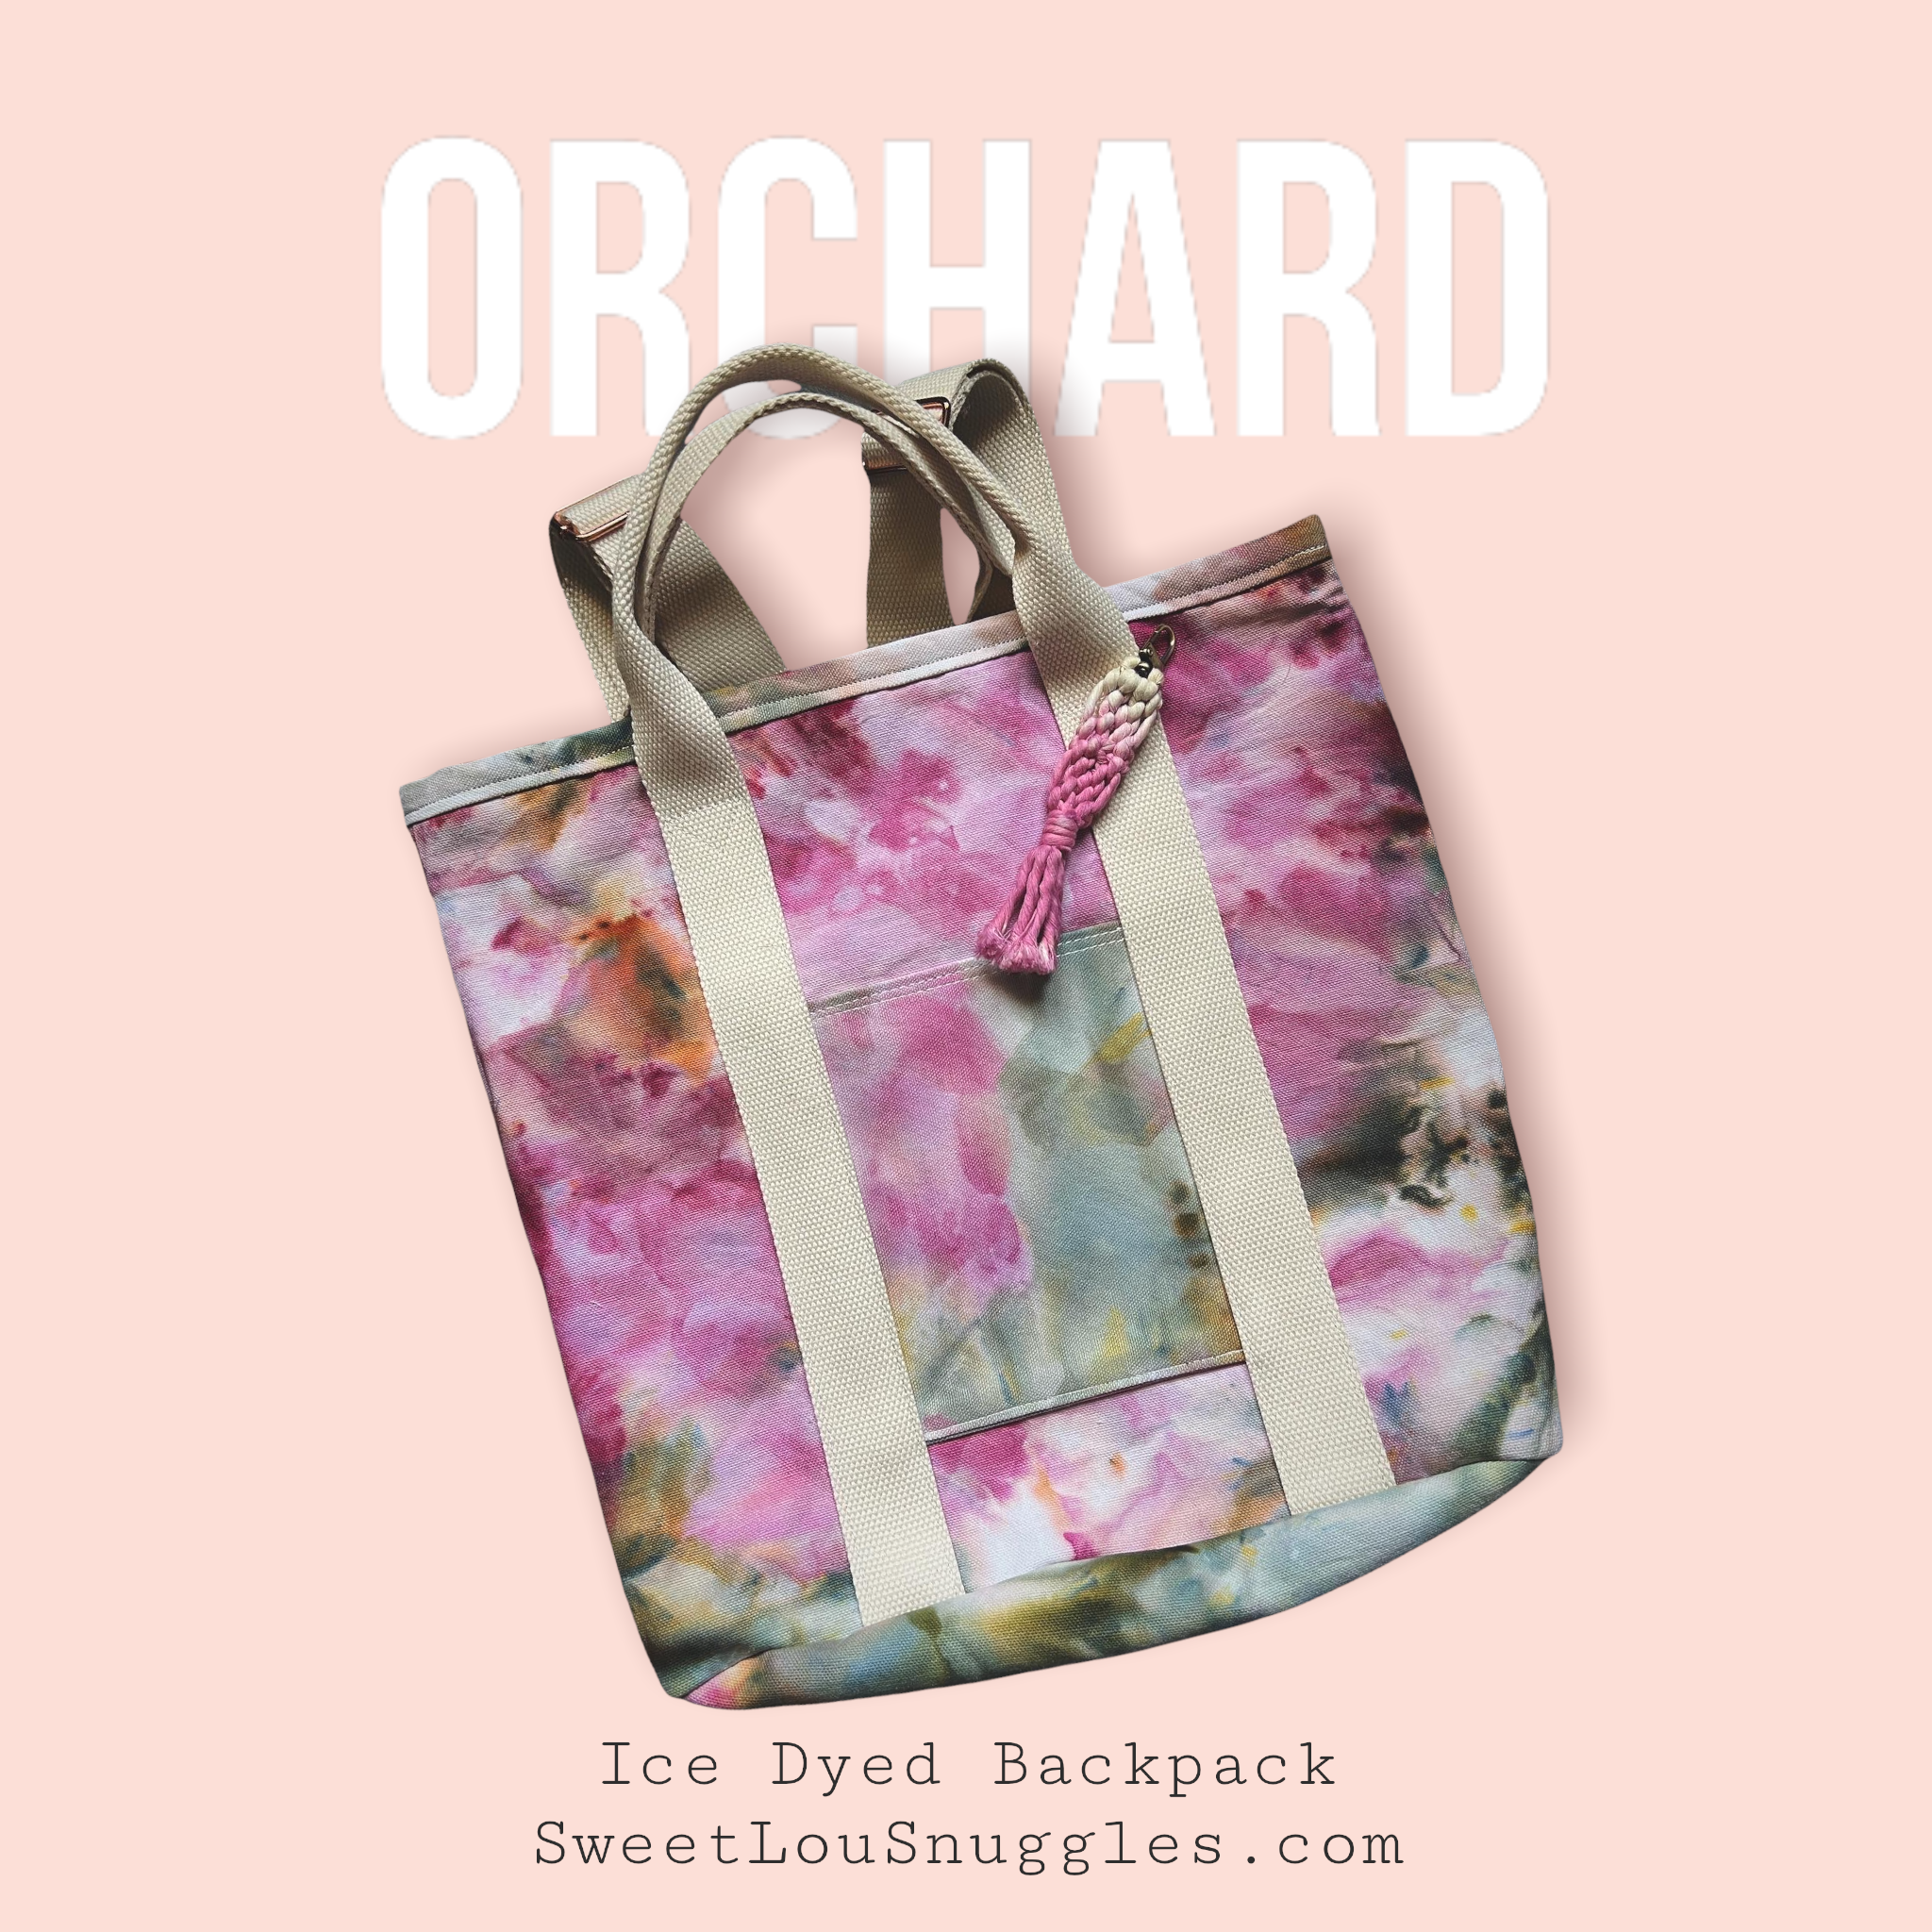 Ice Dyed Backpack - Orchard